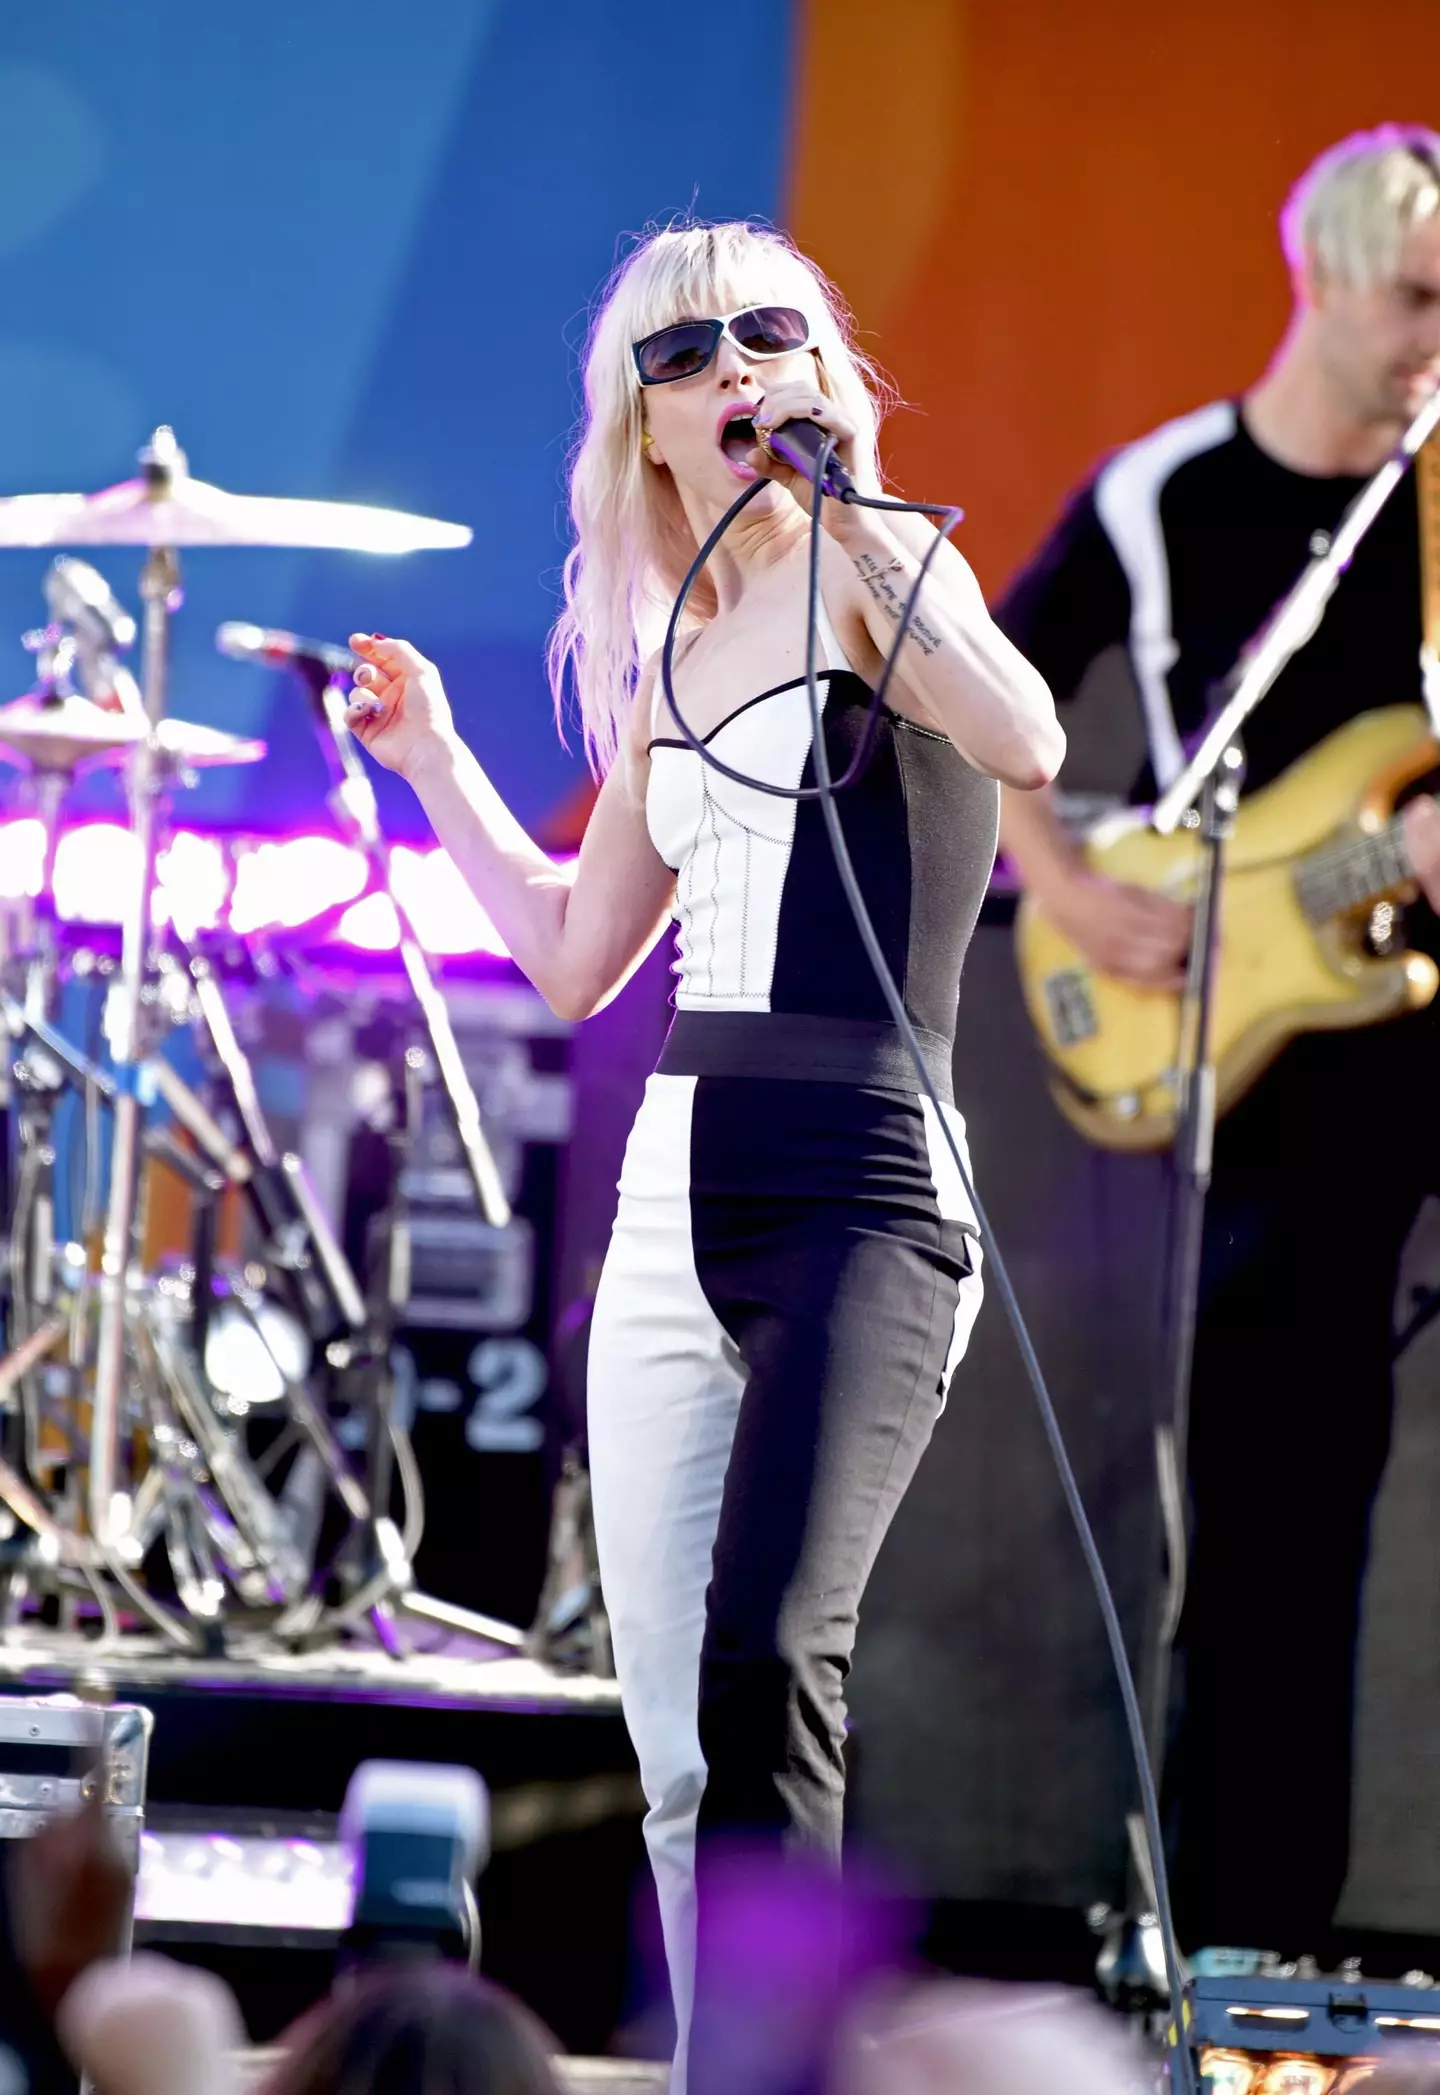 Hayley Williams performing back in 2017.